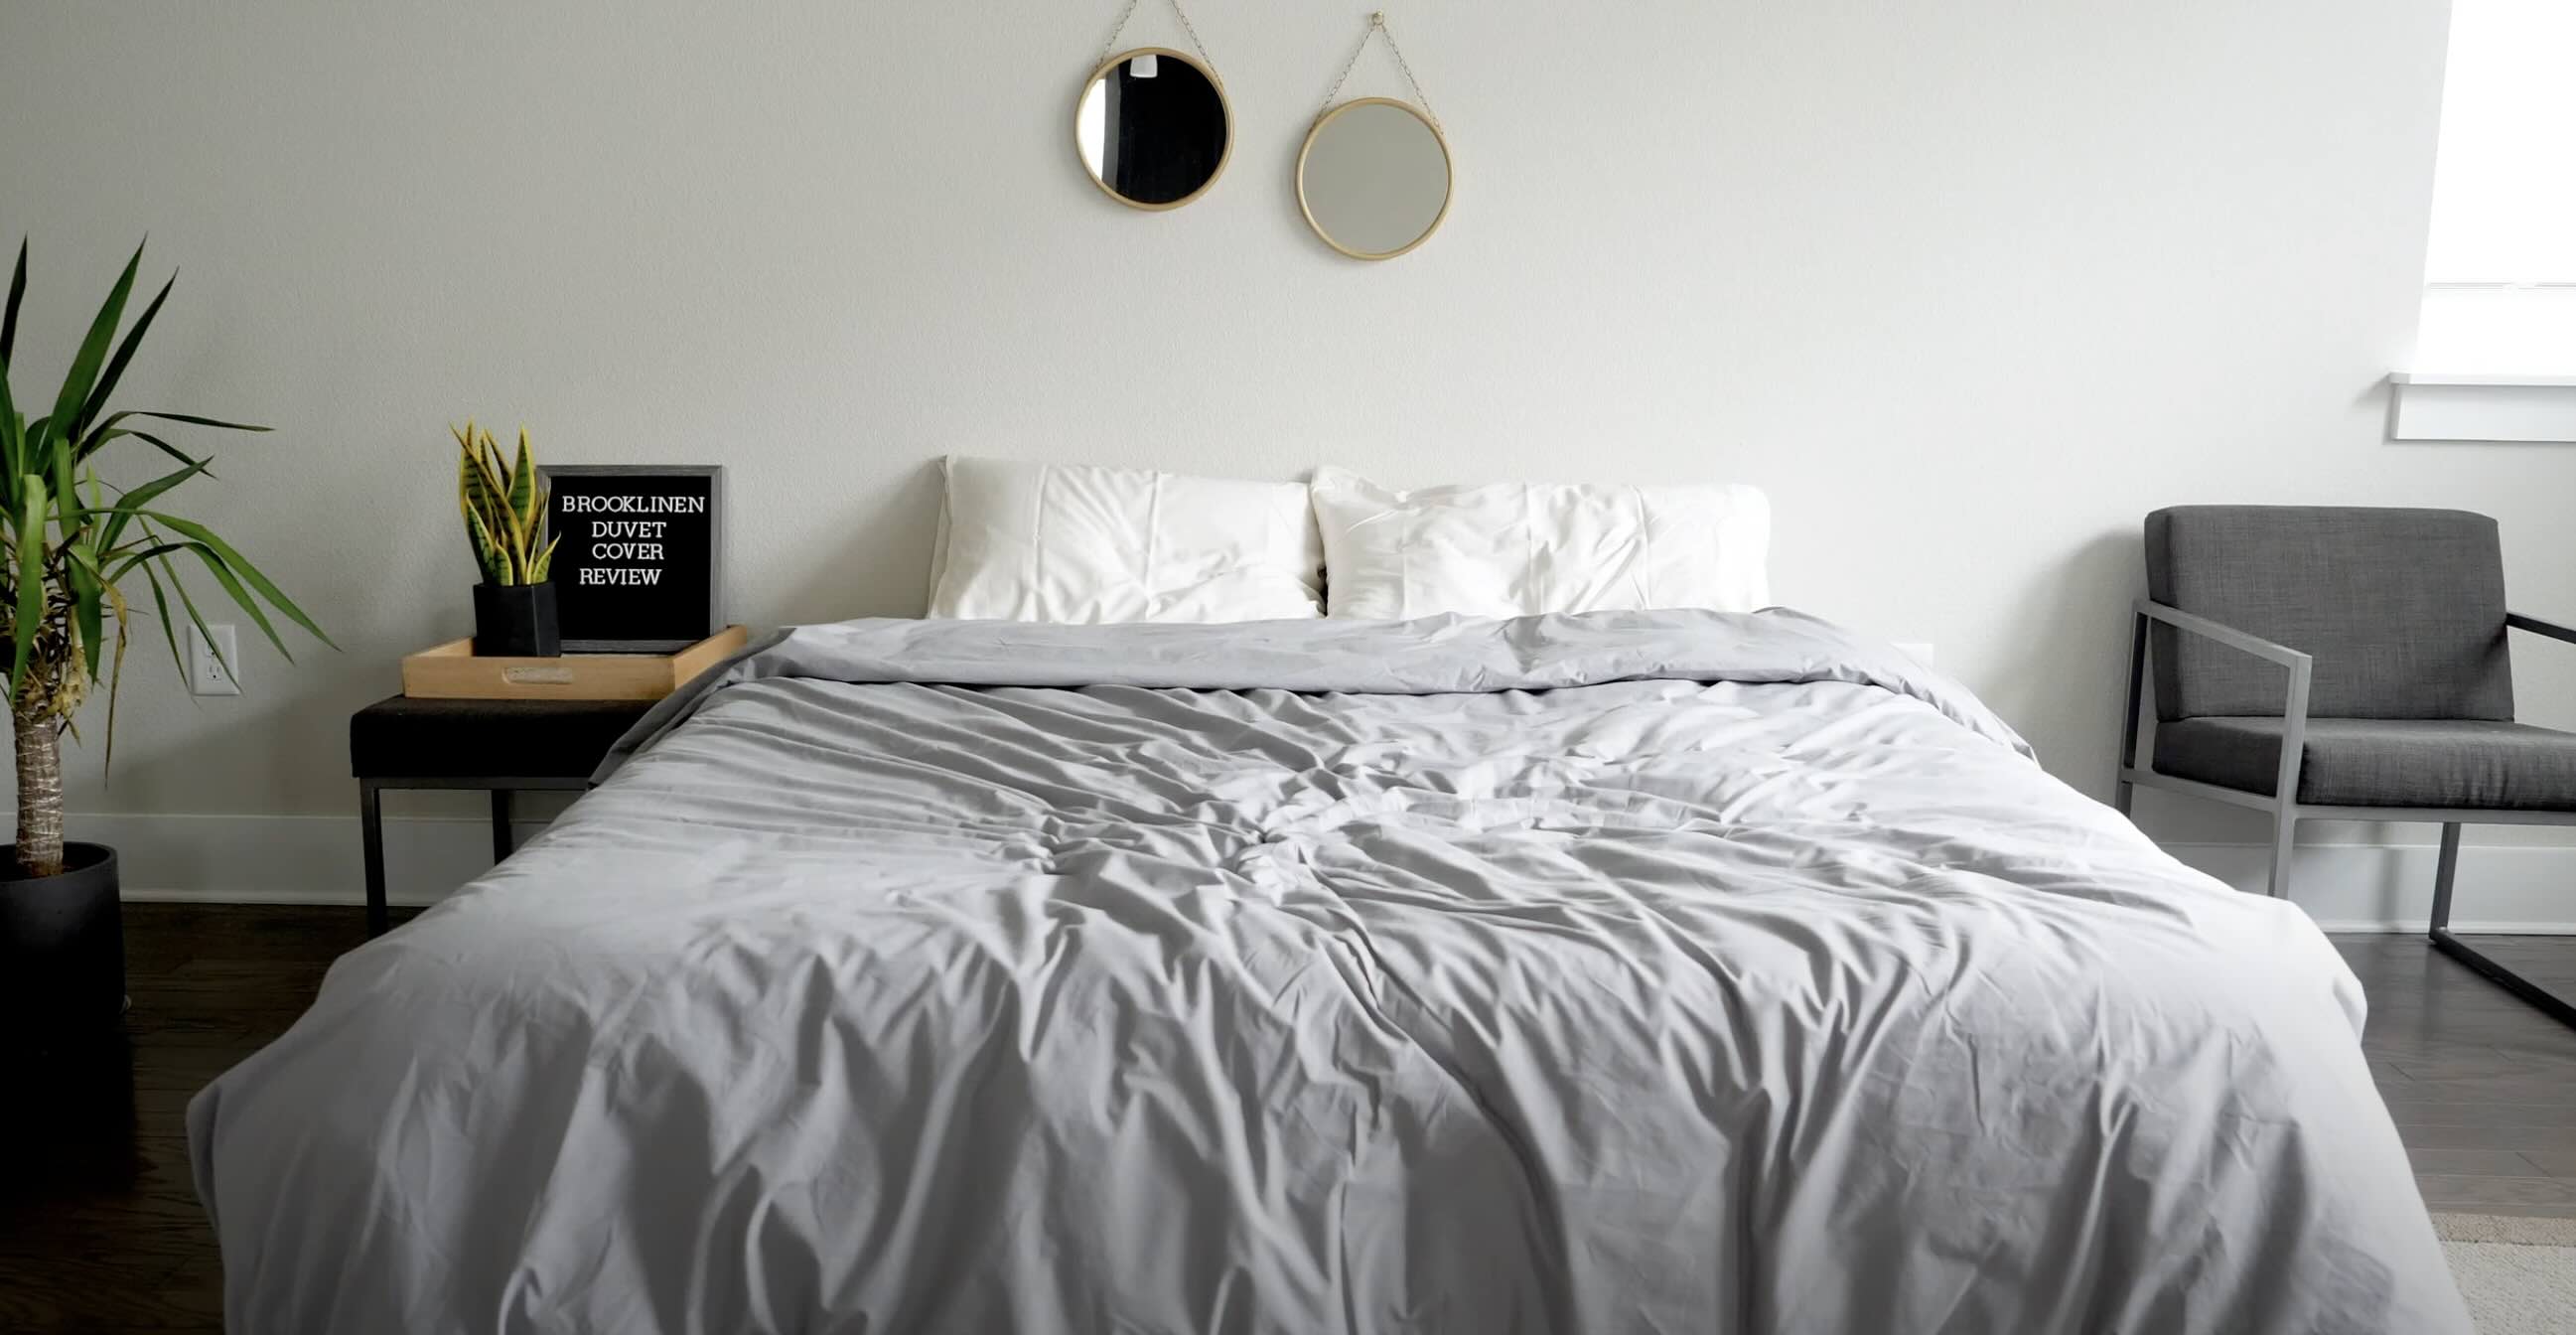 How To Put On A Brooklinen Duvet Cover